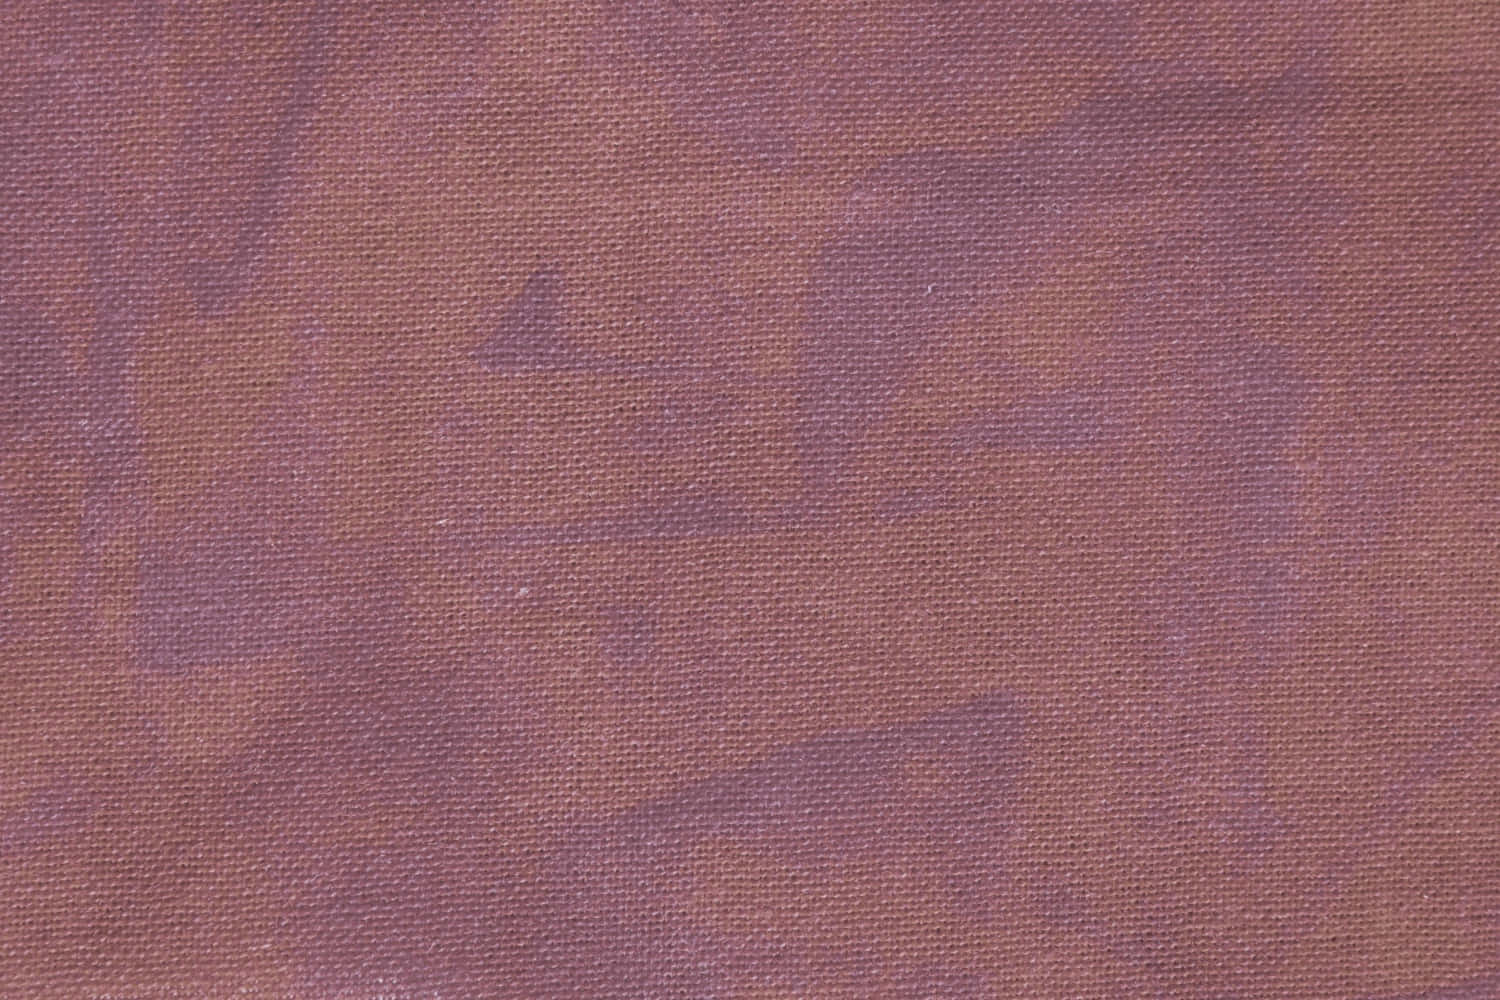 Fabric Texture Pictures Faded Magenta